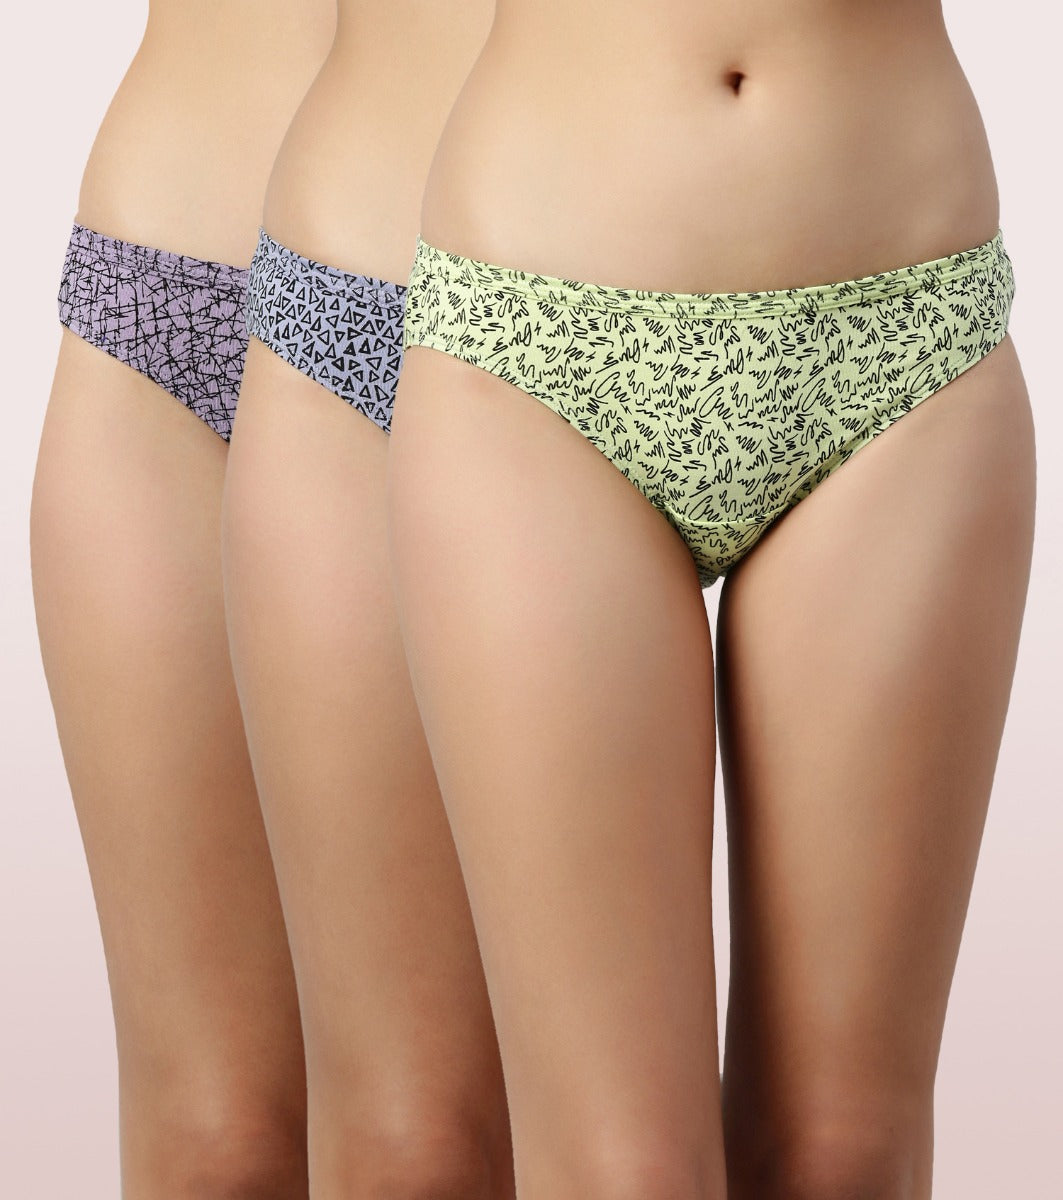 Bikini Panty | Full Coverage & Low Waist | Antimicrobial & Stain Release Finish | Pack of 3 | Colors and Print May vary